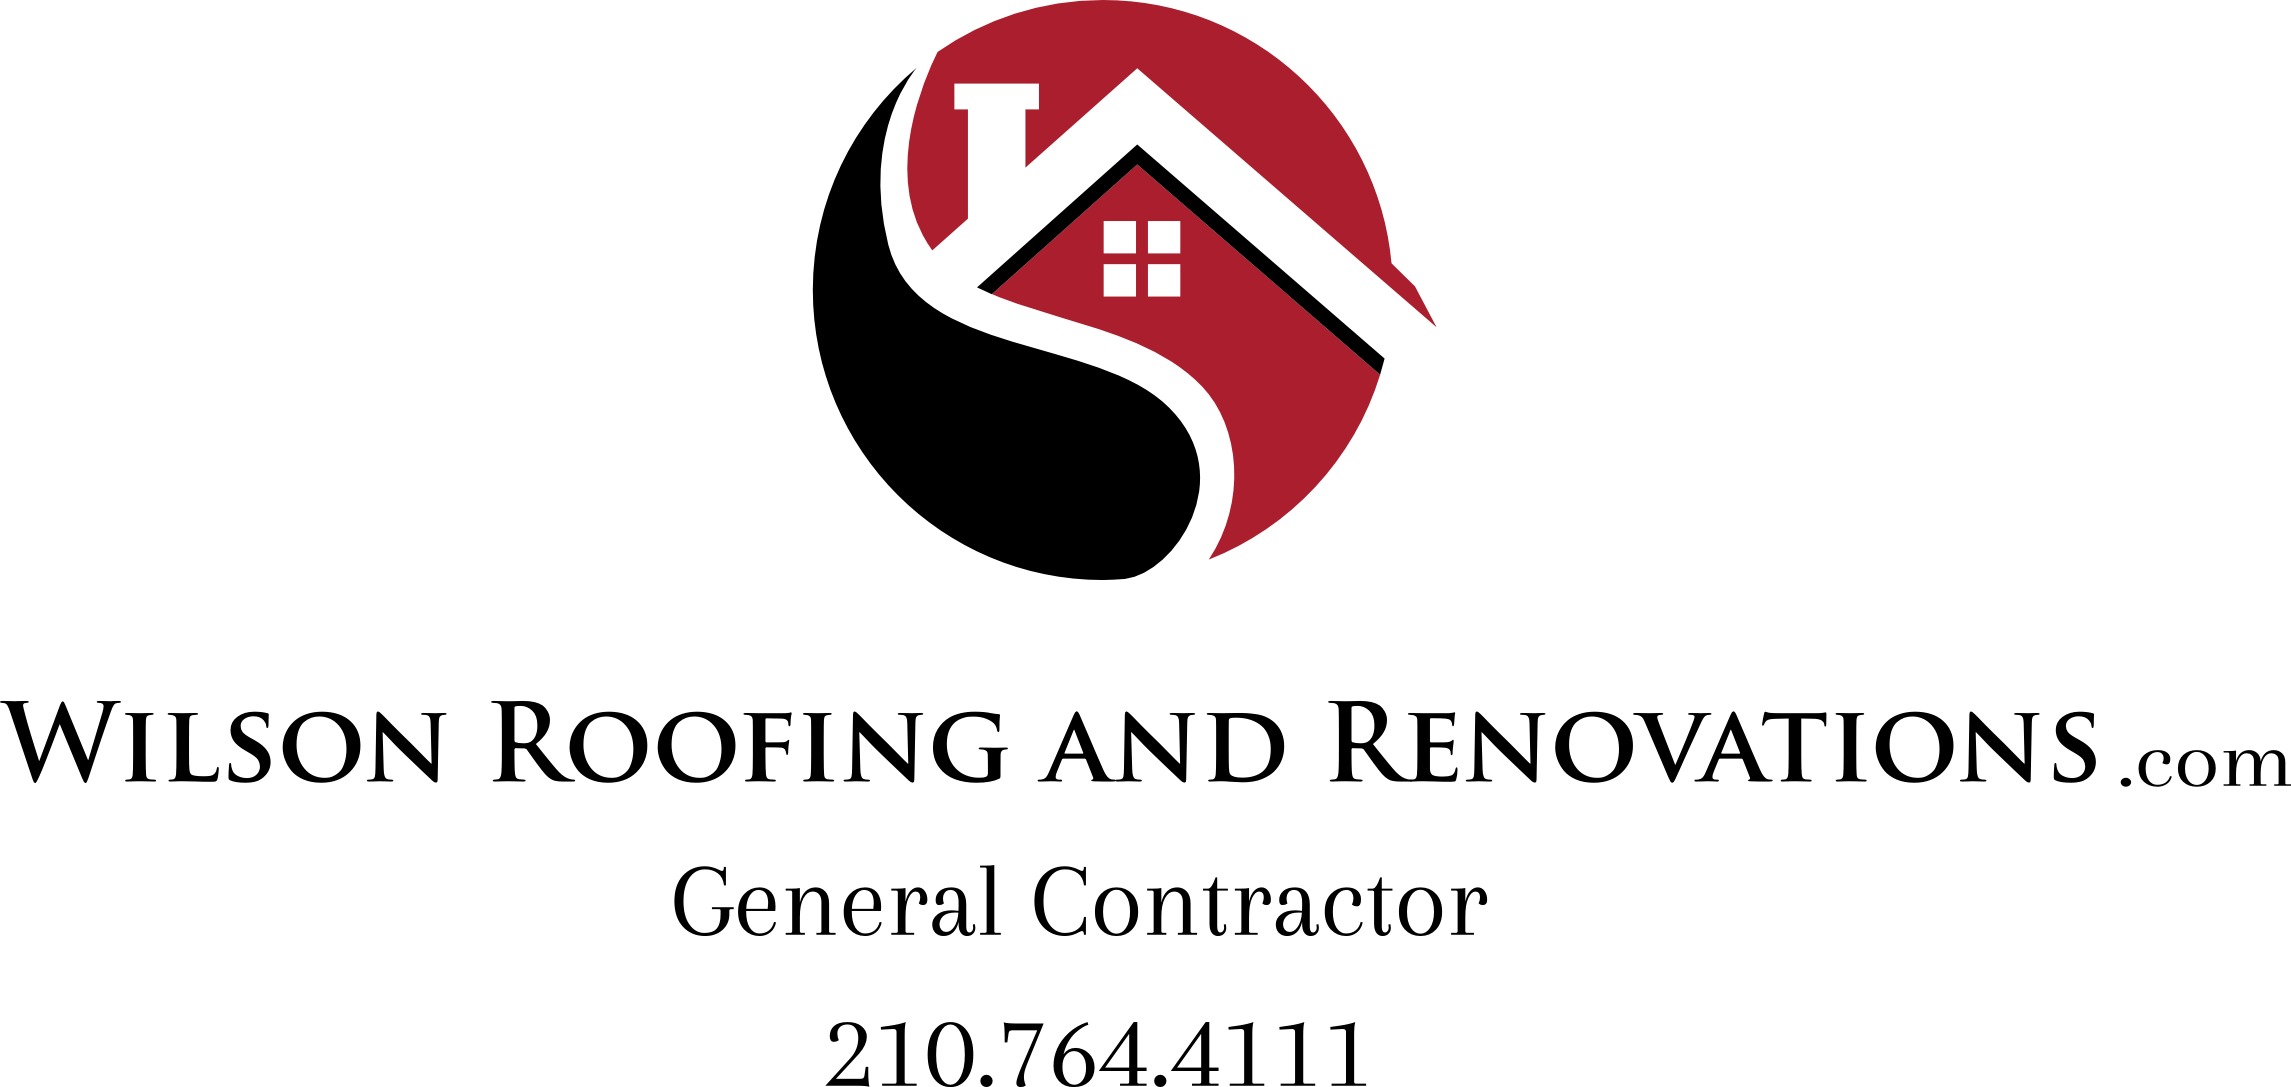 Wilson Roofing and Renovations, LLC Logo